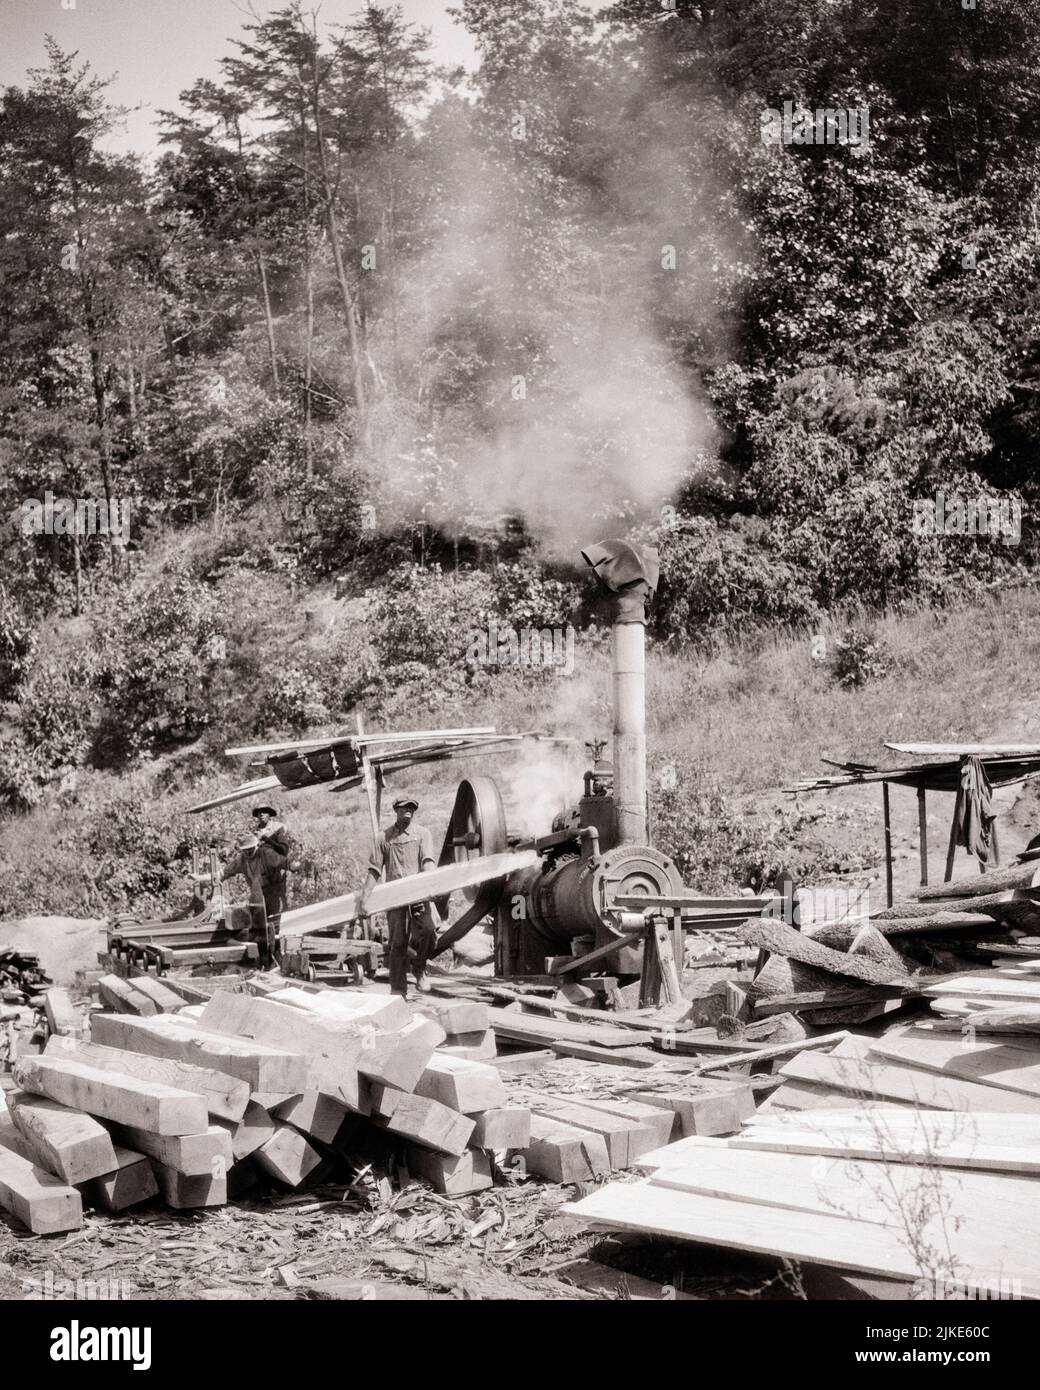 1930s 1940s TWO AFRICAN AMERICAN MEN SAWYERS MANUFACTURING LUMBER ON STEAM ENGINE DRIVEN SAWMILL RURAL VIRGINIA USA - i351 HAR001 HARS B&W NORTH AMERICA NORTH AMERICAN SKILL OCCUPATION SKILLS AFRICAN-AMERICANS AFRICAN-AMERICAN CAREERS TIMBER BLACK ETHNICITY LABOR ON EMPLOYMENT MANUFACTURING OCCUPATIONS CIRCULAR DRIVEN INFRASTRUCTURE EMPLOYEE LUMBER POWERED SAWING SAWMILL VA BLACK AND WHITE HAR001 LABORING OLD FASHIONED AFRICAN AMERICANS Stock Photo